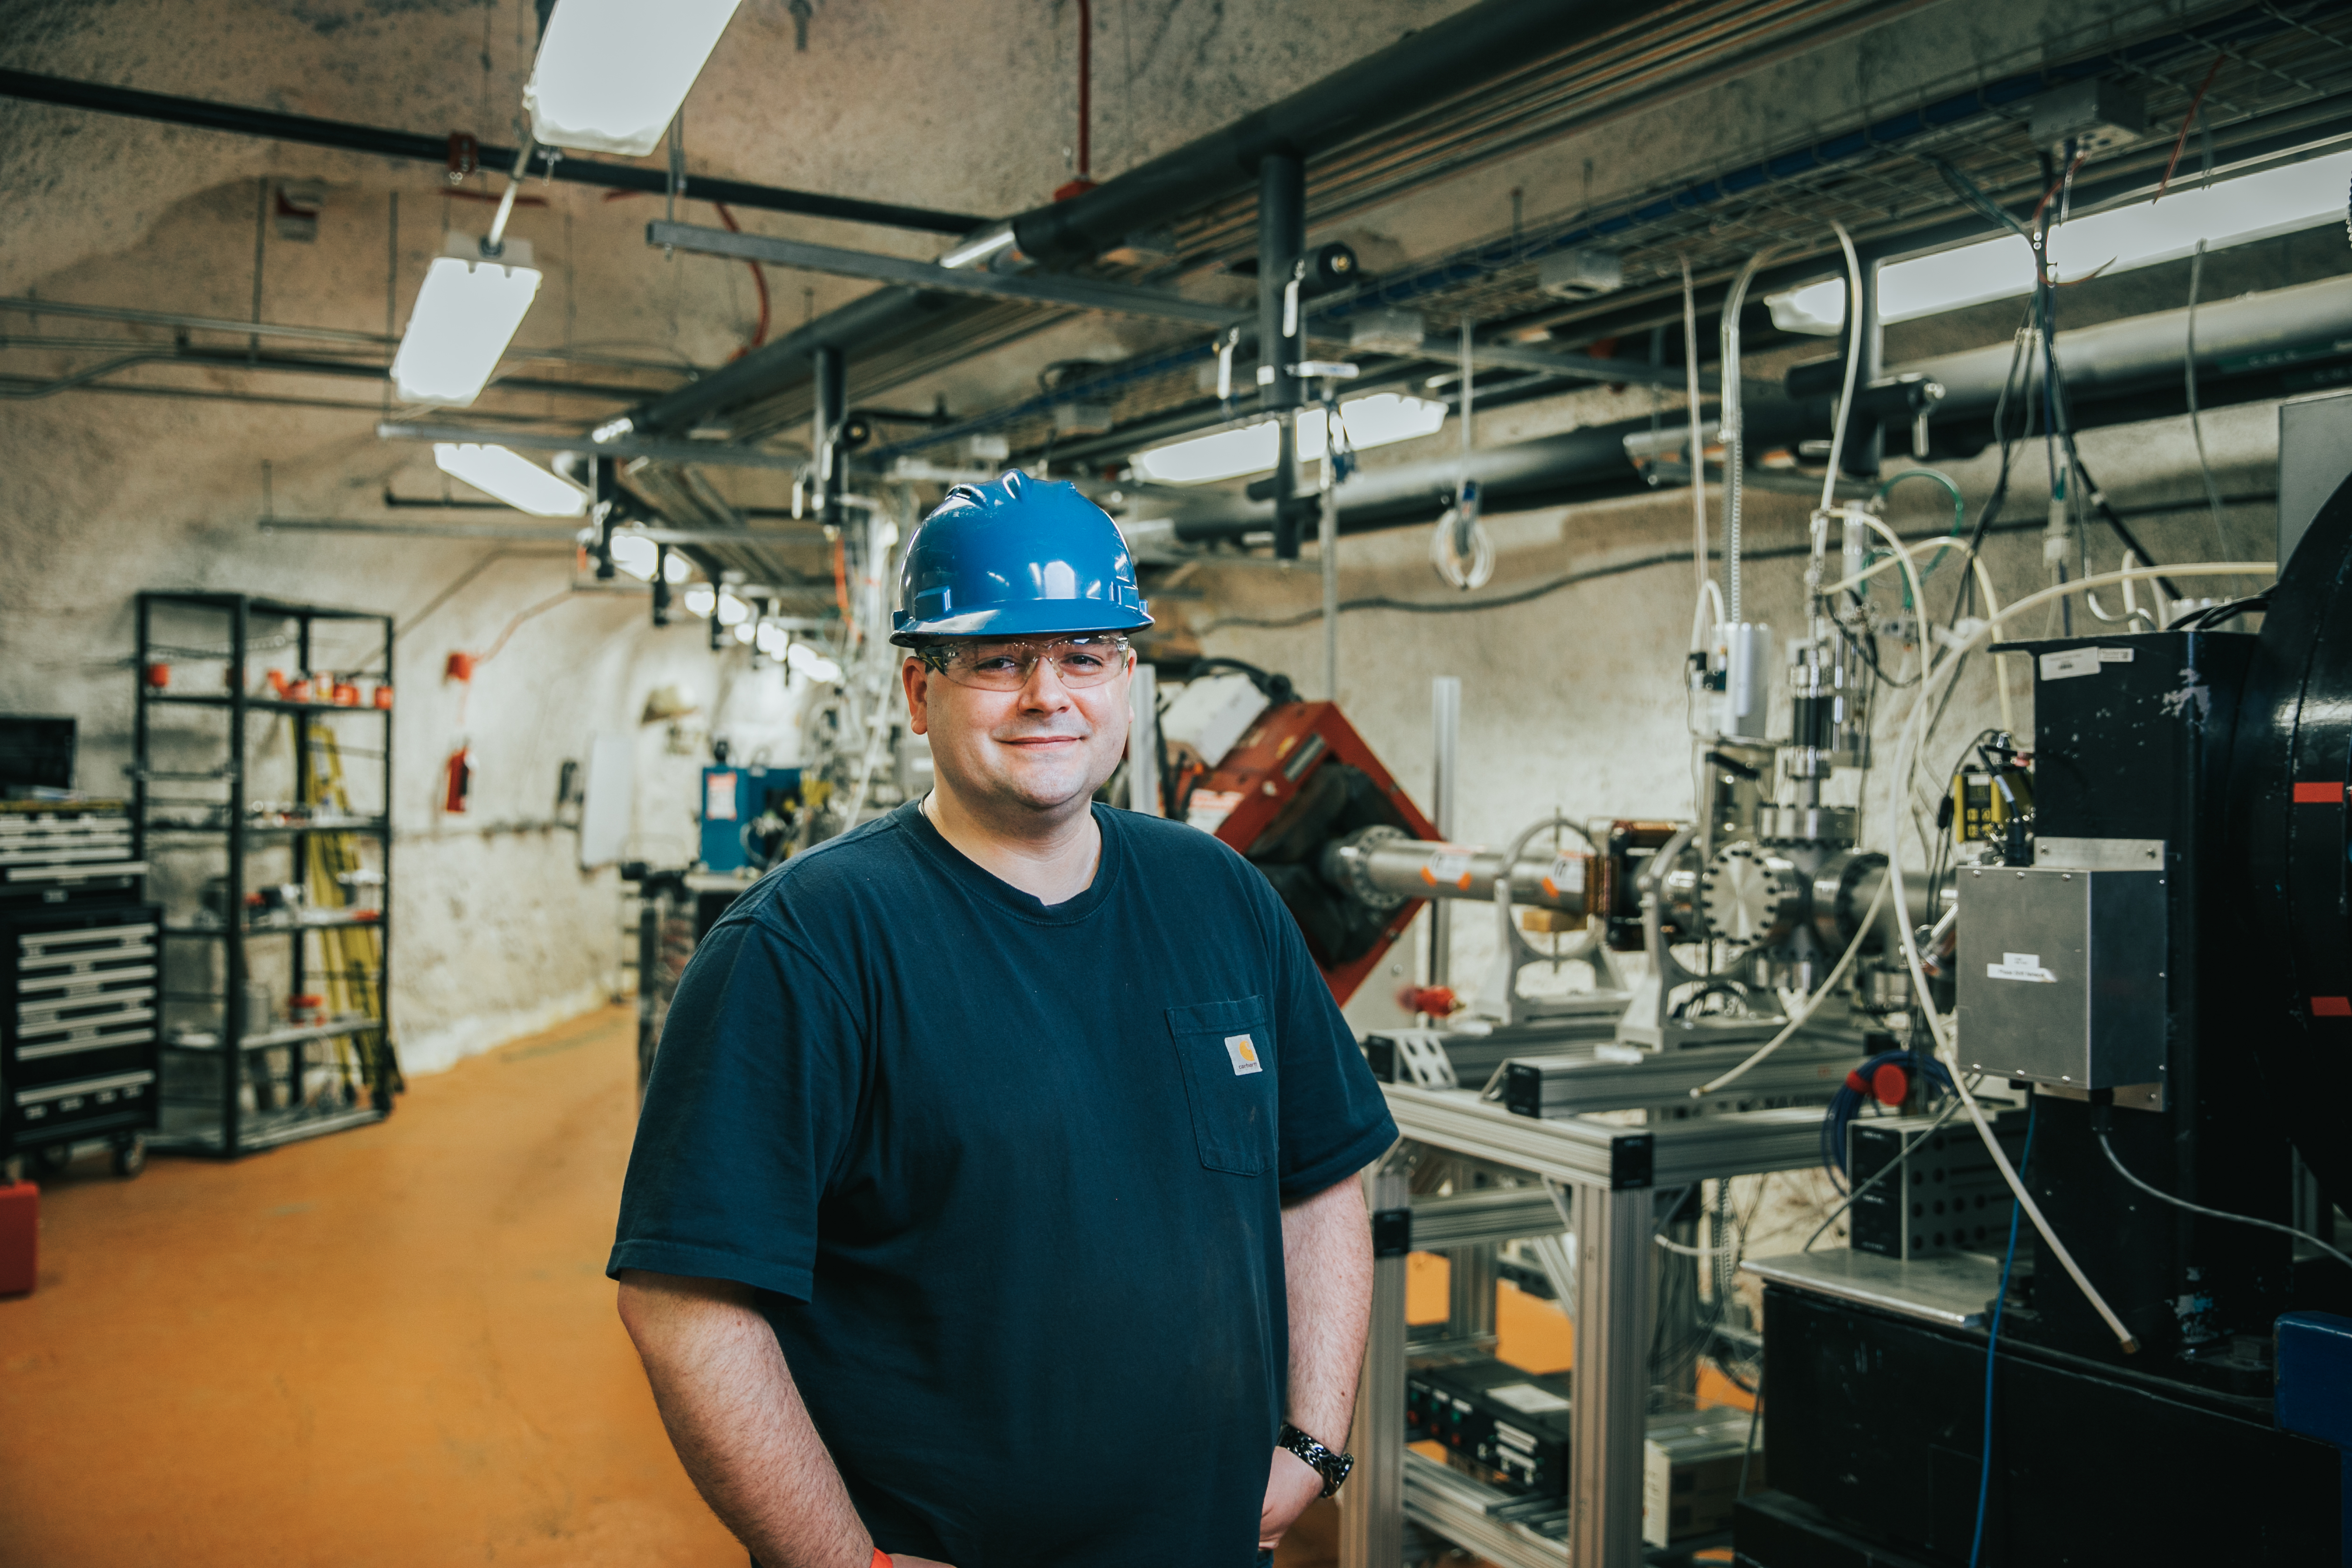 Researcher stands in front of accelerator in underground lab